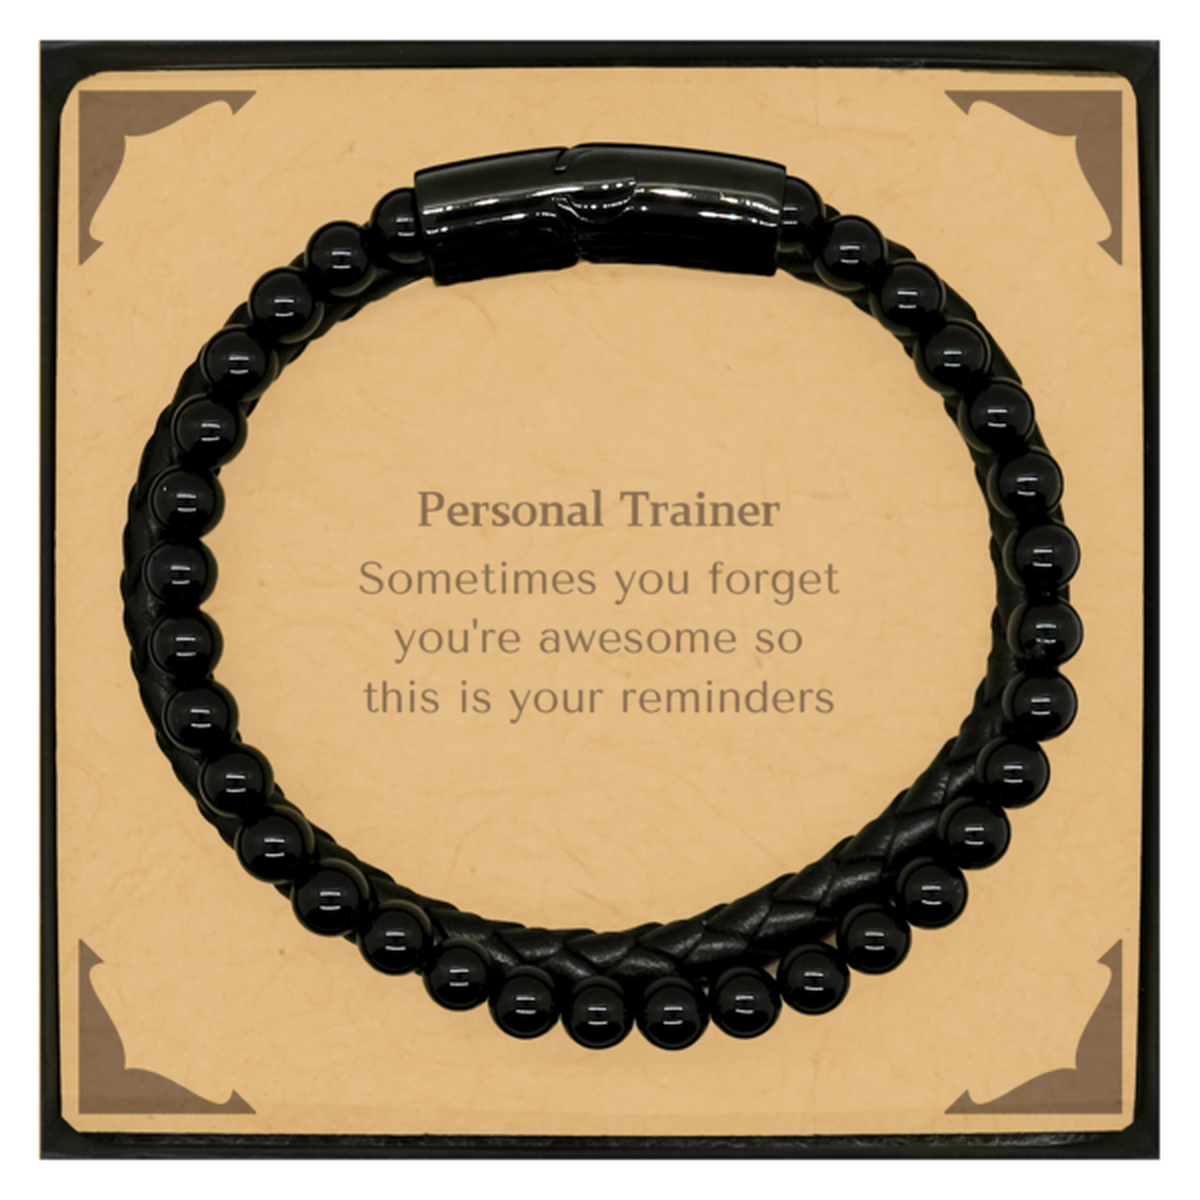 Sentimental Personal Trainer Stone Leather Bracelets, Personal Trainer Sometimes you forget you're awesome so this is your reminders, Graduation Christmas Birthday Gifts for Personal Trainer, Men, Women, Coworkers